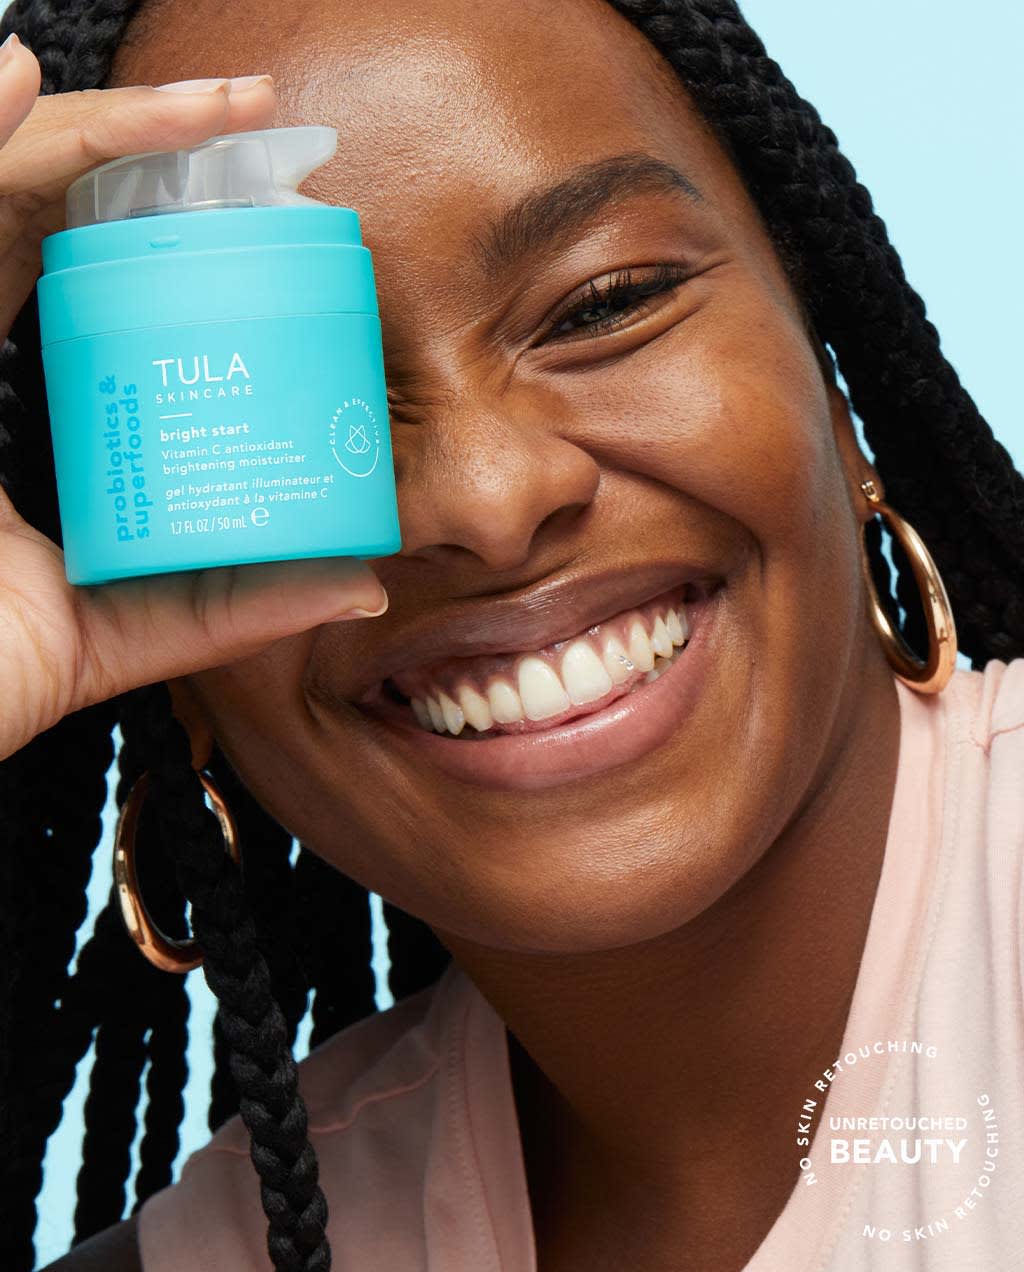 Tula Skin Care On the Go Best Sellers Travel Kit | Facial Cleanser, Day &  Night Moisturizer, Sugar Scrub & Vitamin C Serum for Glowing, Radiant Skin